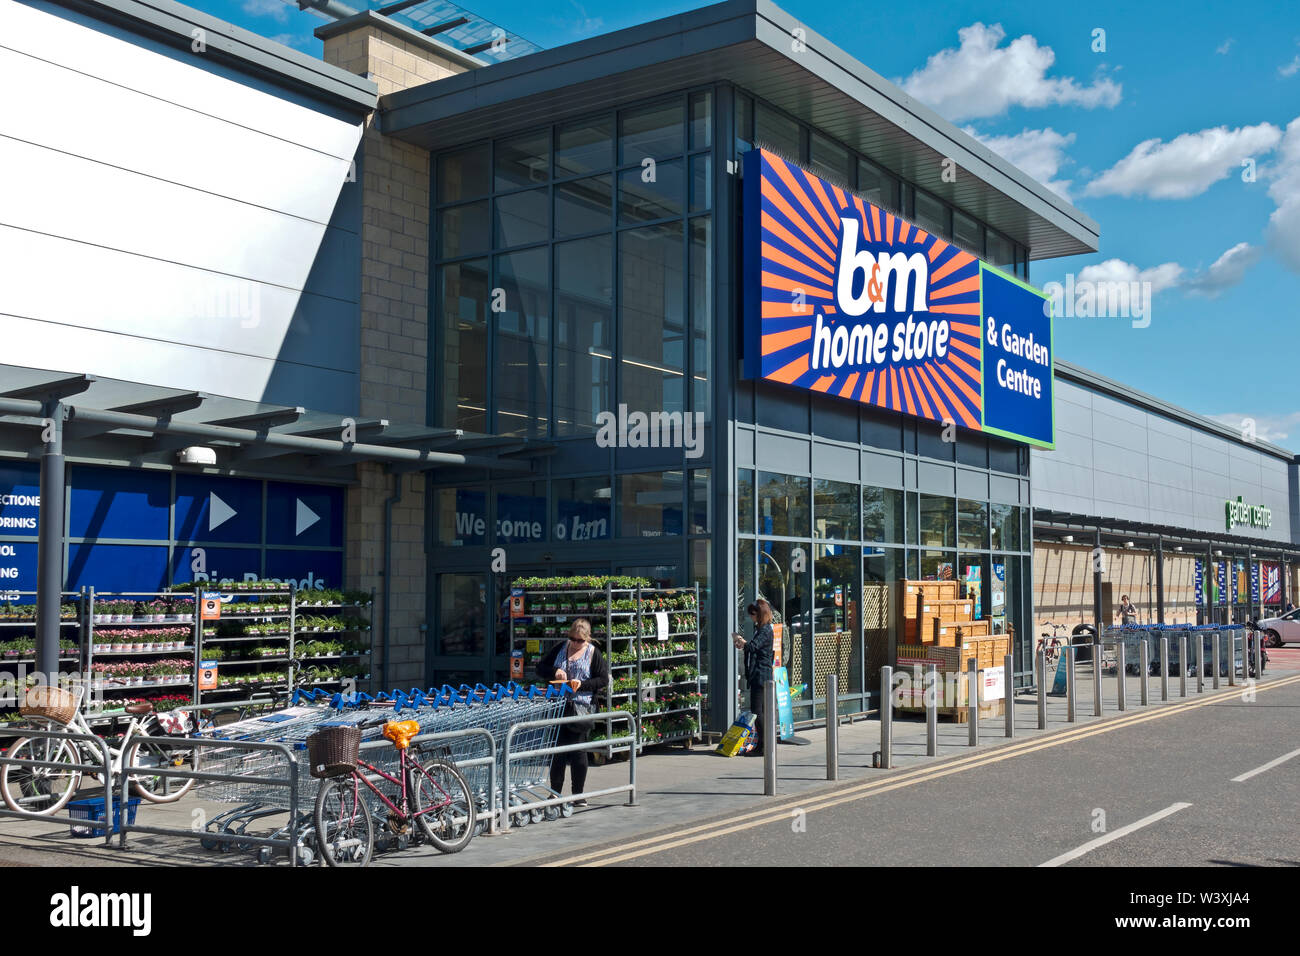 B&M Home Convenience Store and Garden Centre Shop Foss Islands York North Yorkshire England UK United Kingdom GB Great Britain Stock Photo